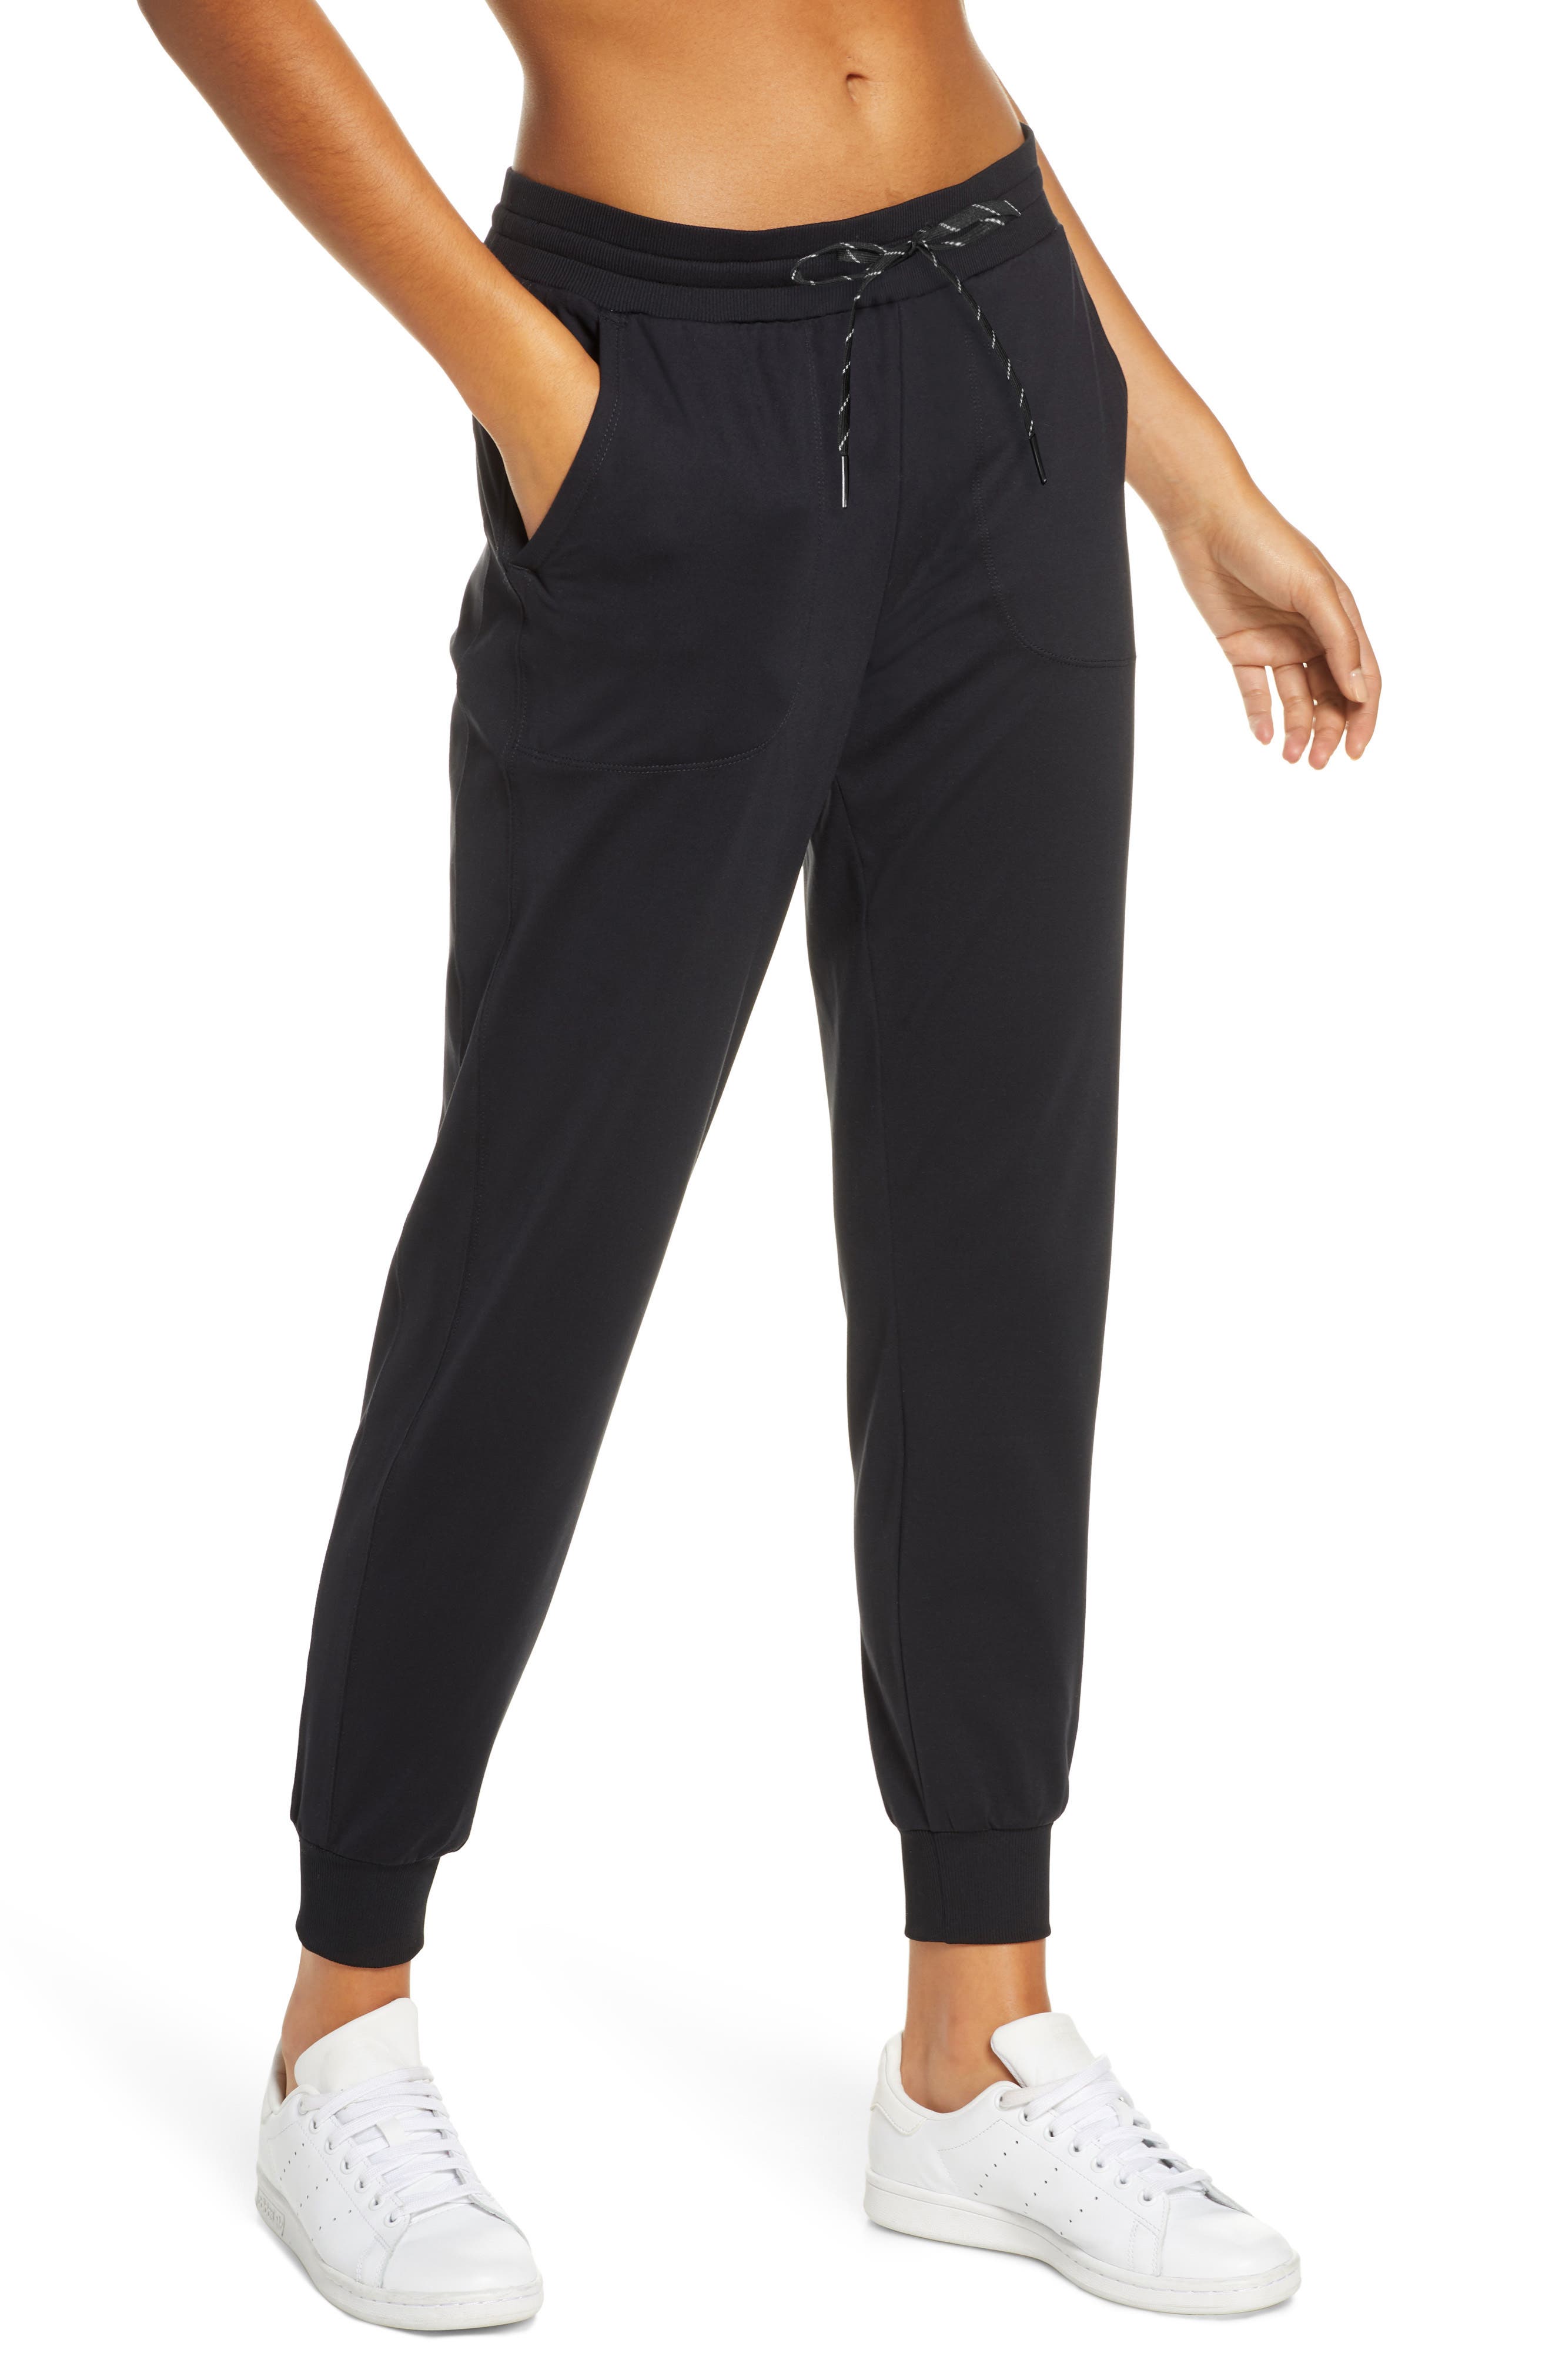 N.Y.L Womens Drawstring Ruched Ankle Pockets Workout Yoga Jogger Sweatpants